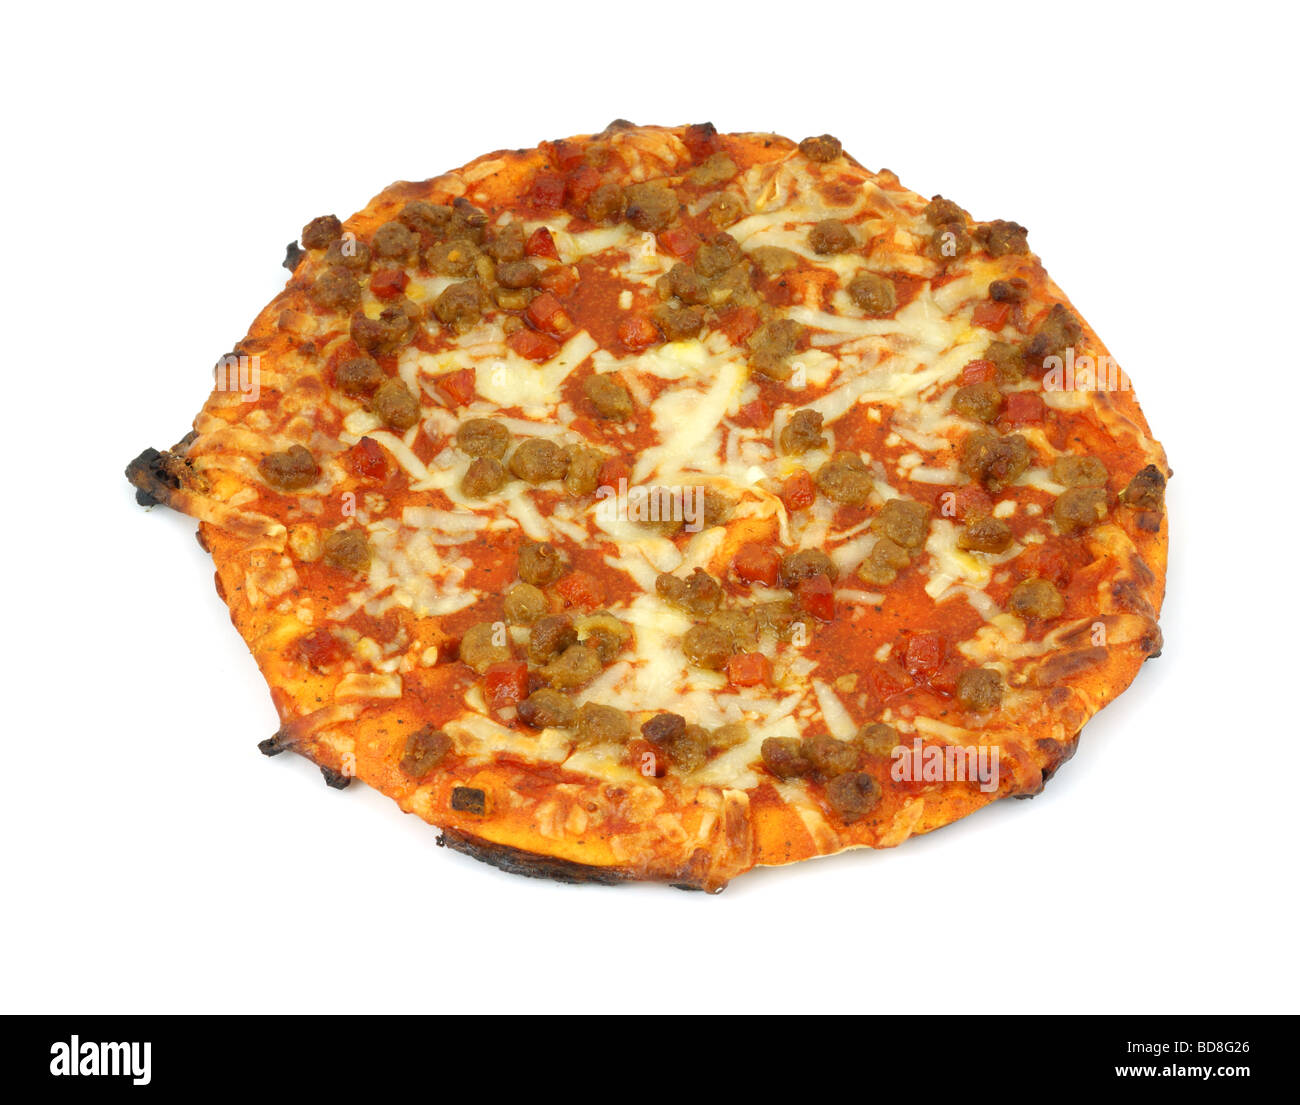 Cooked inexpensive pizza Stock Photo